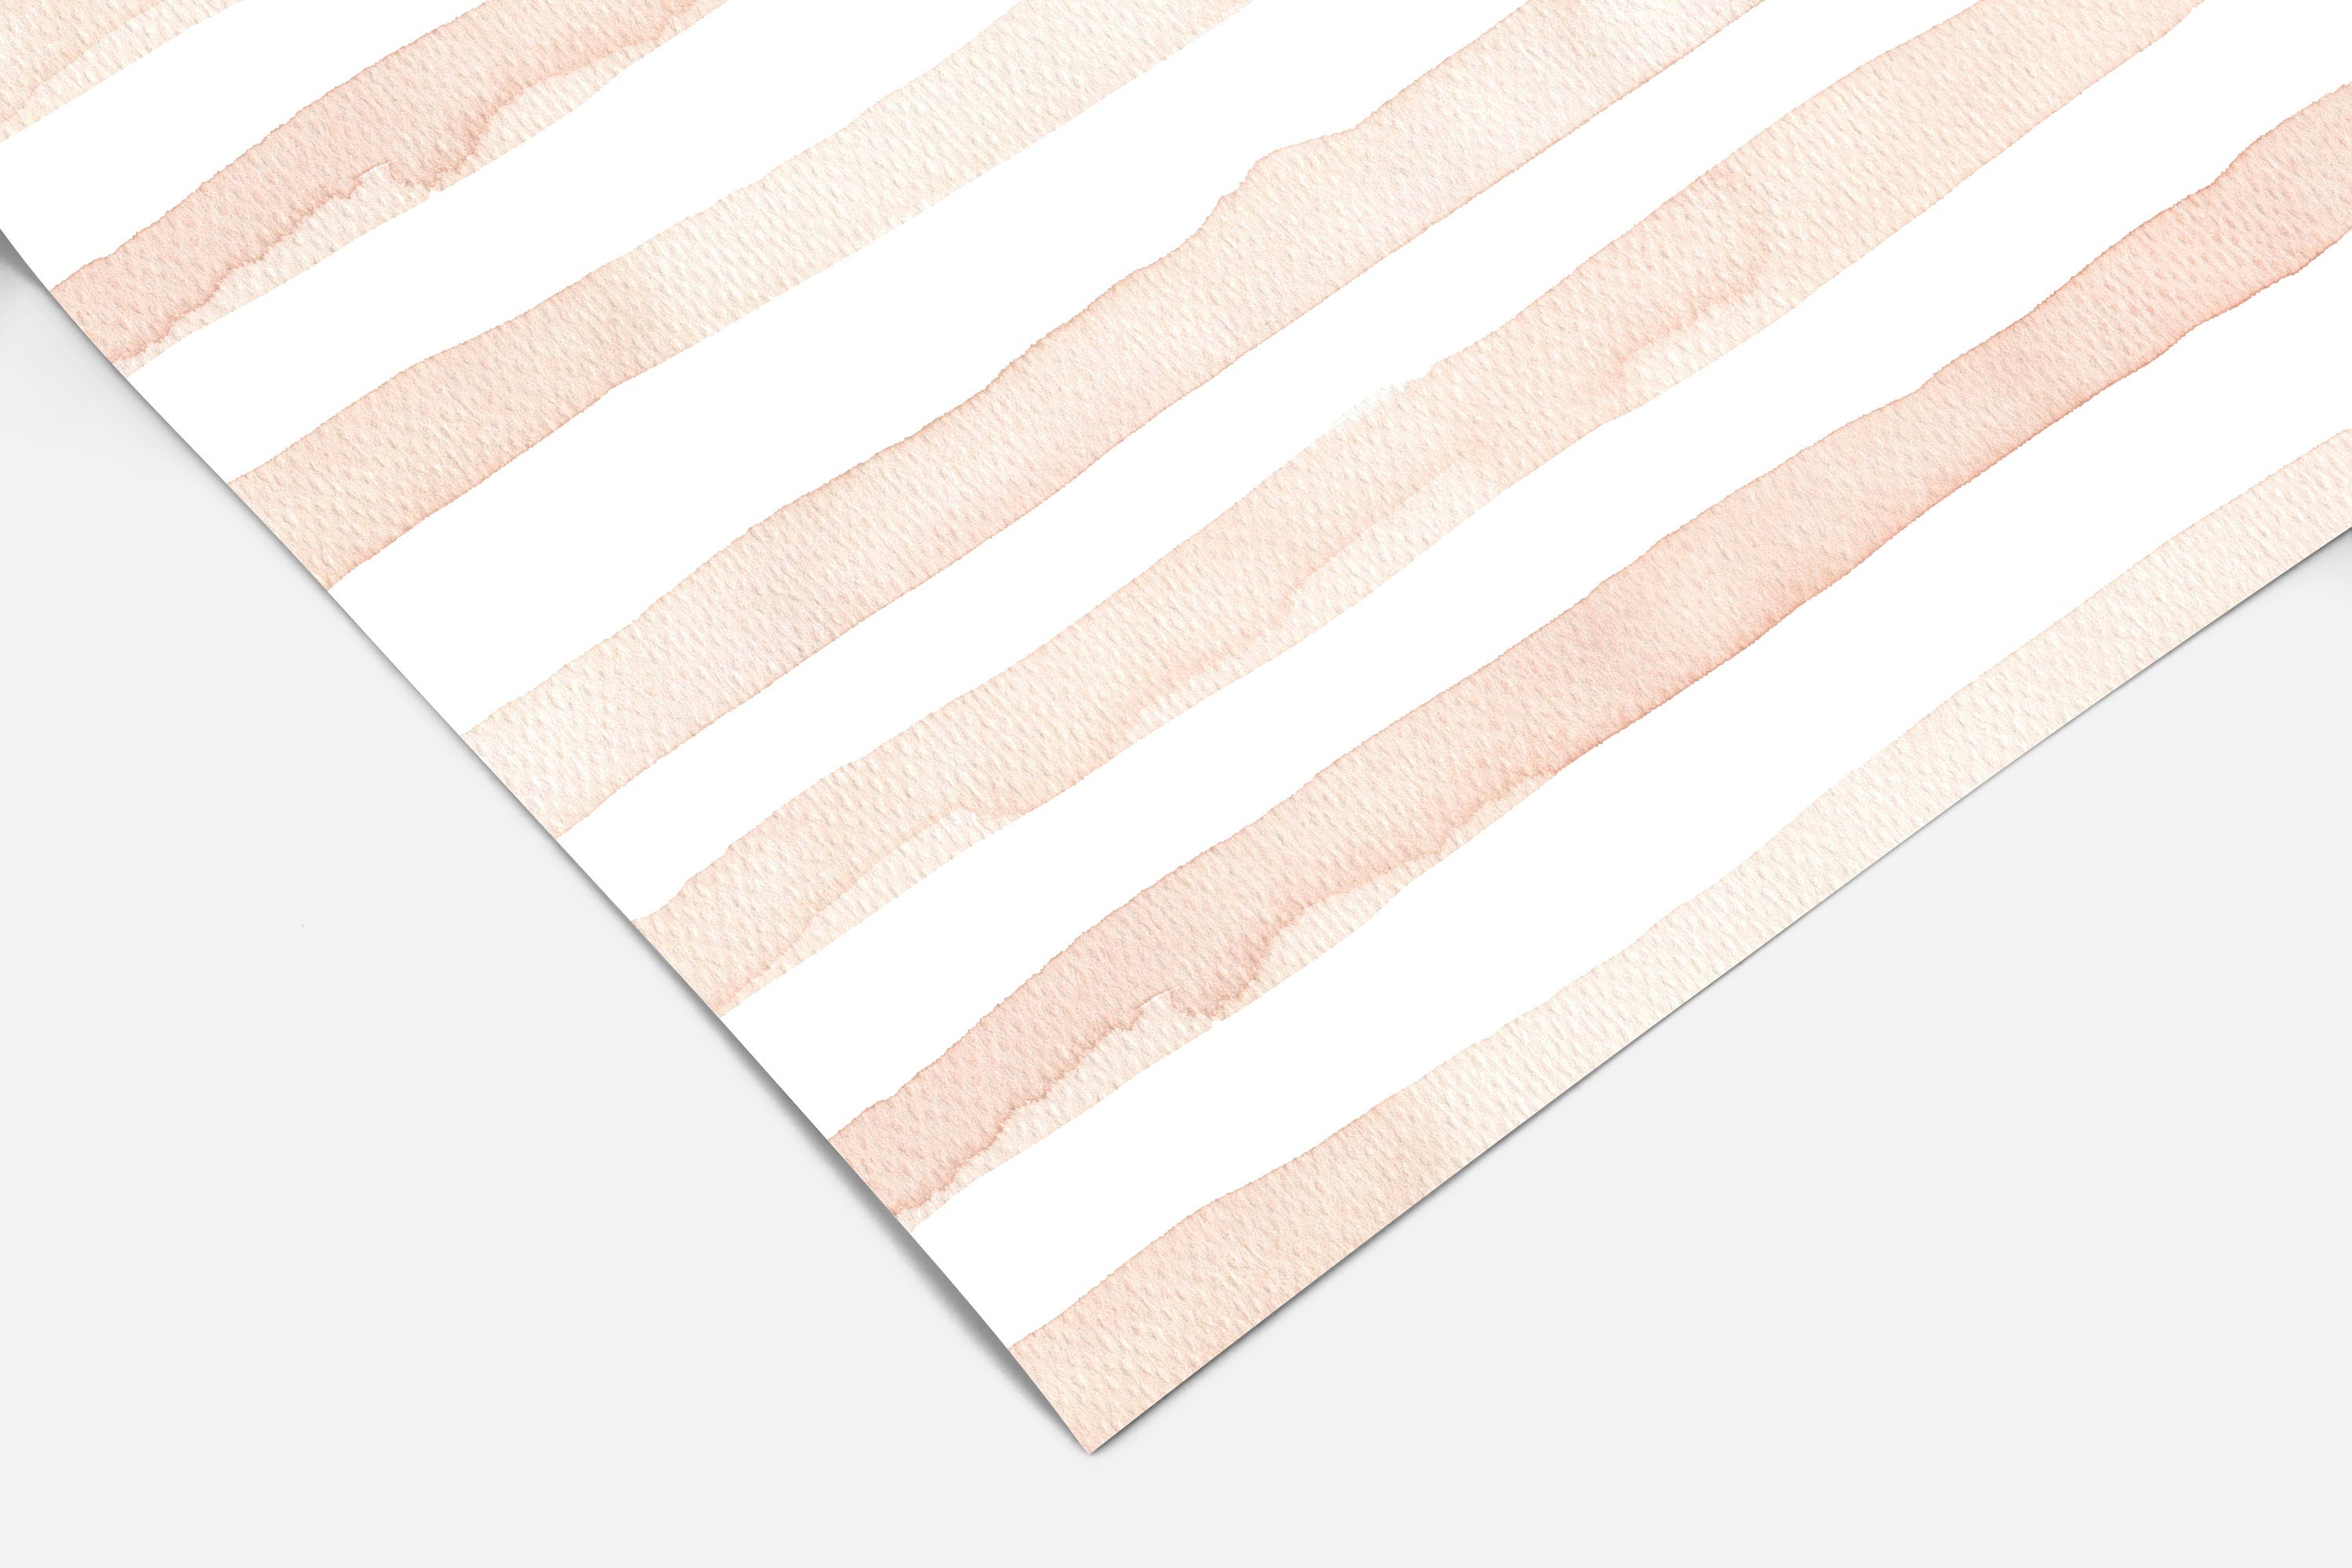 Washed Out Watercolor Wallpaper | Wallpaper Peel and Stick | Removable Wallpaper | Wall Paper Peel And Stick | Wall Mural | Wall Decor 3409 - JamesAndColors